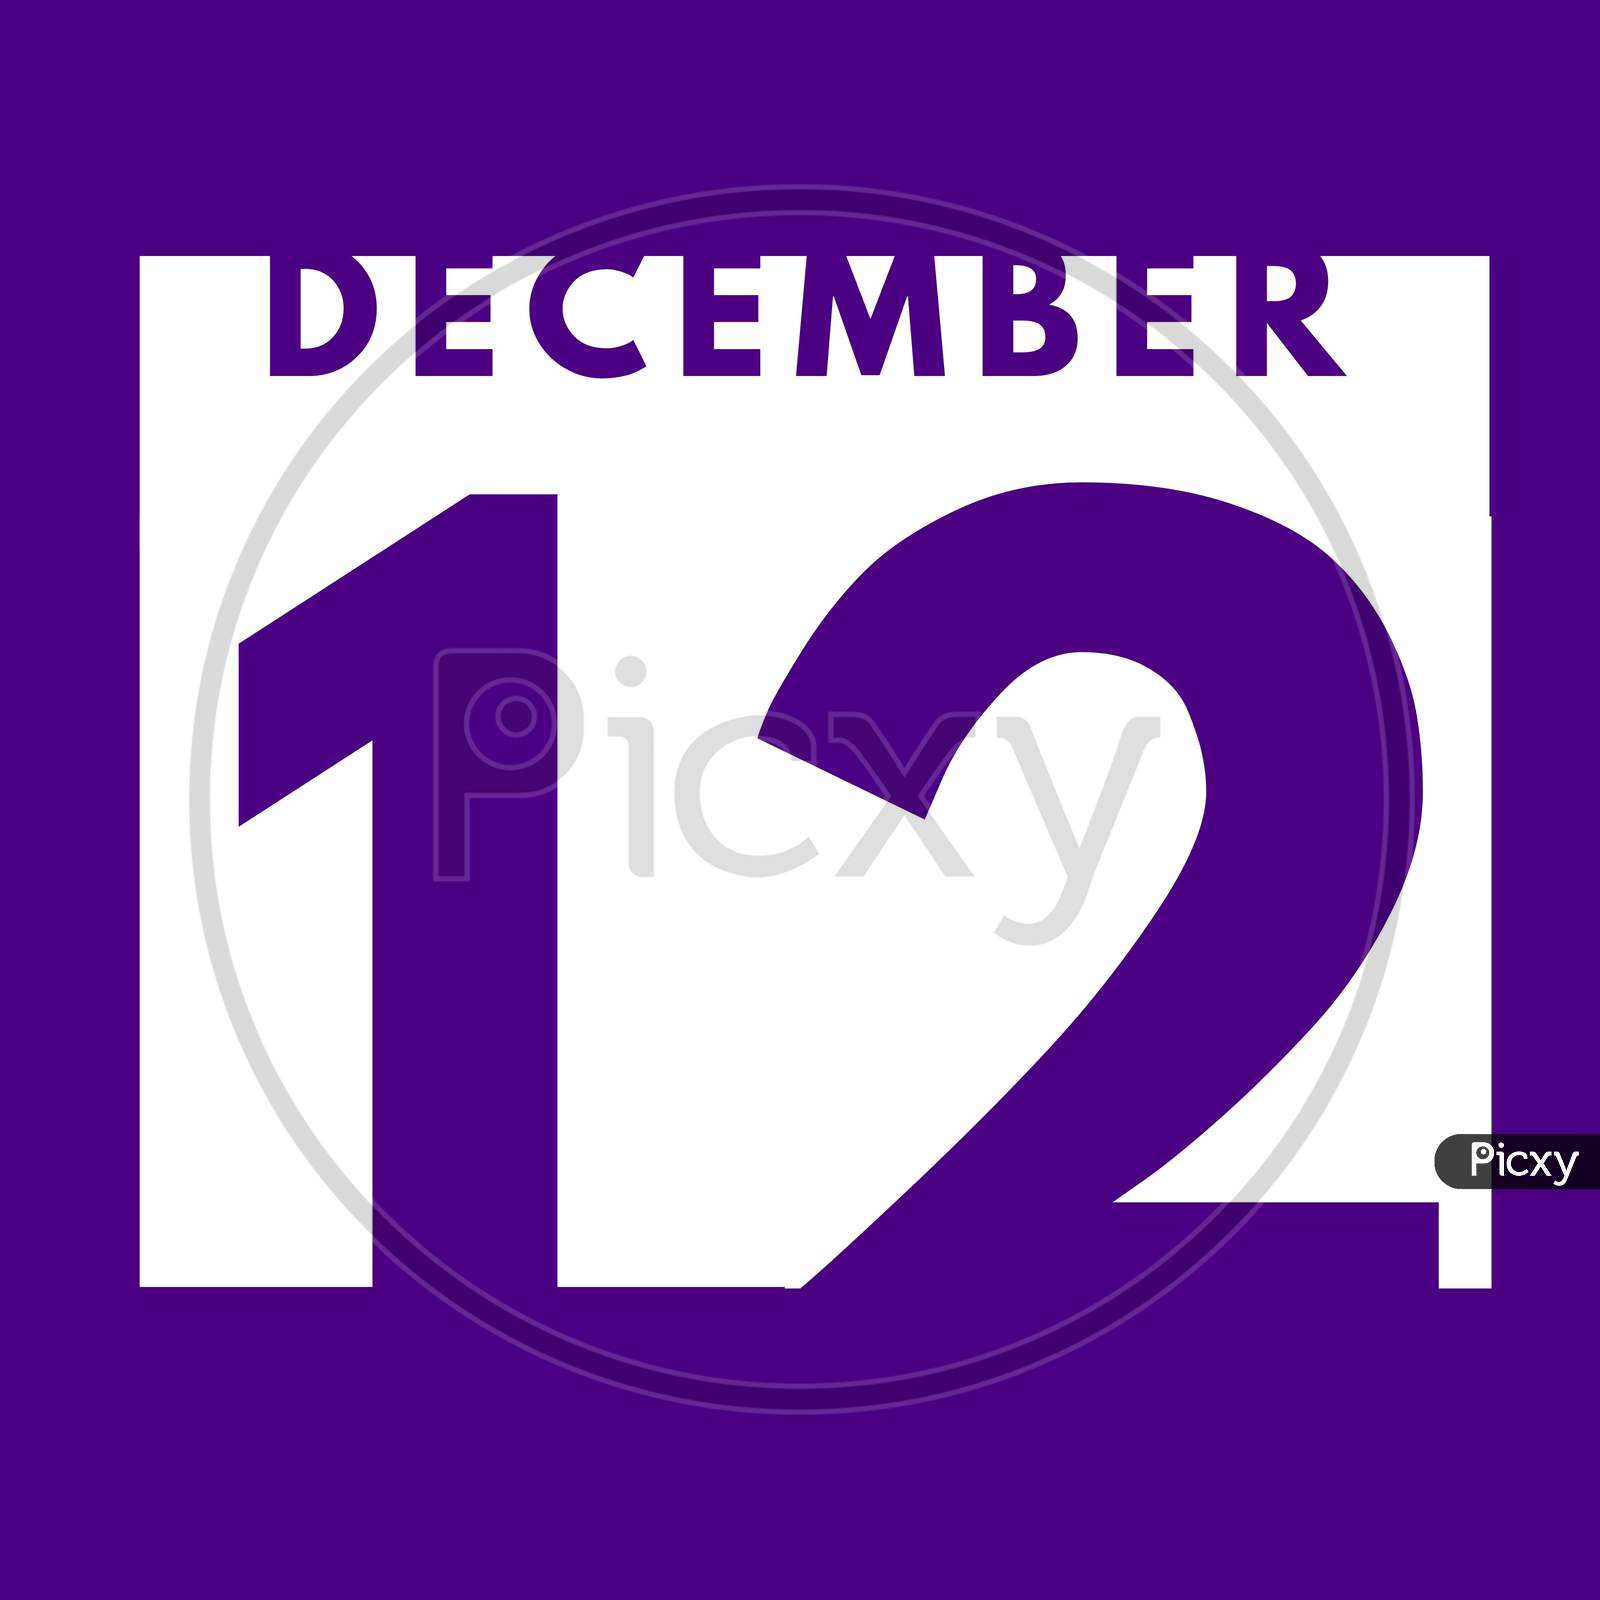 December 12 . Flat Modern Daily Calendar Icon .Date ,Day, Month .Calendar For The Month Of December